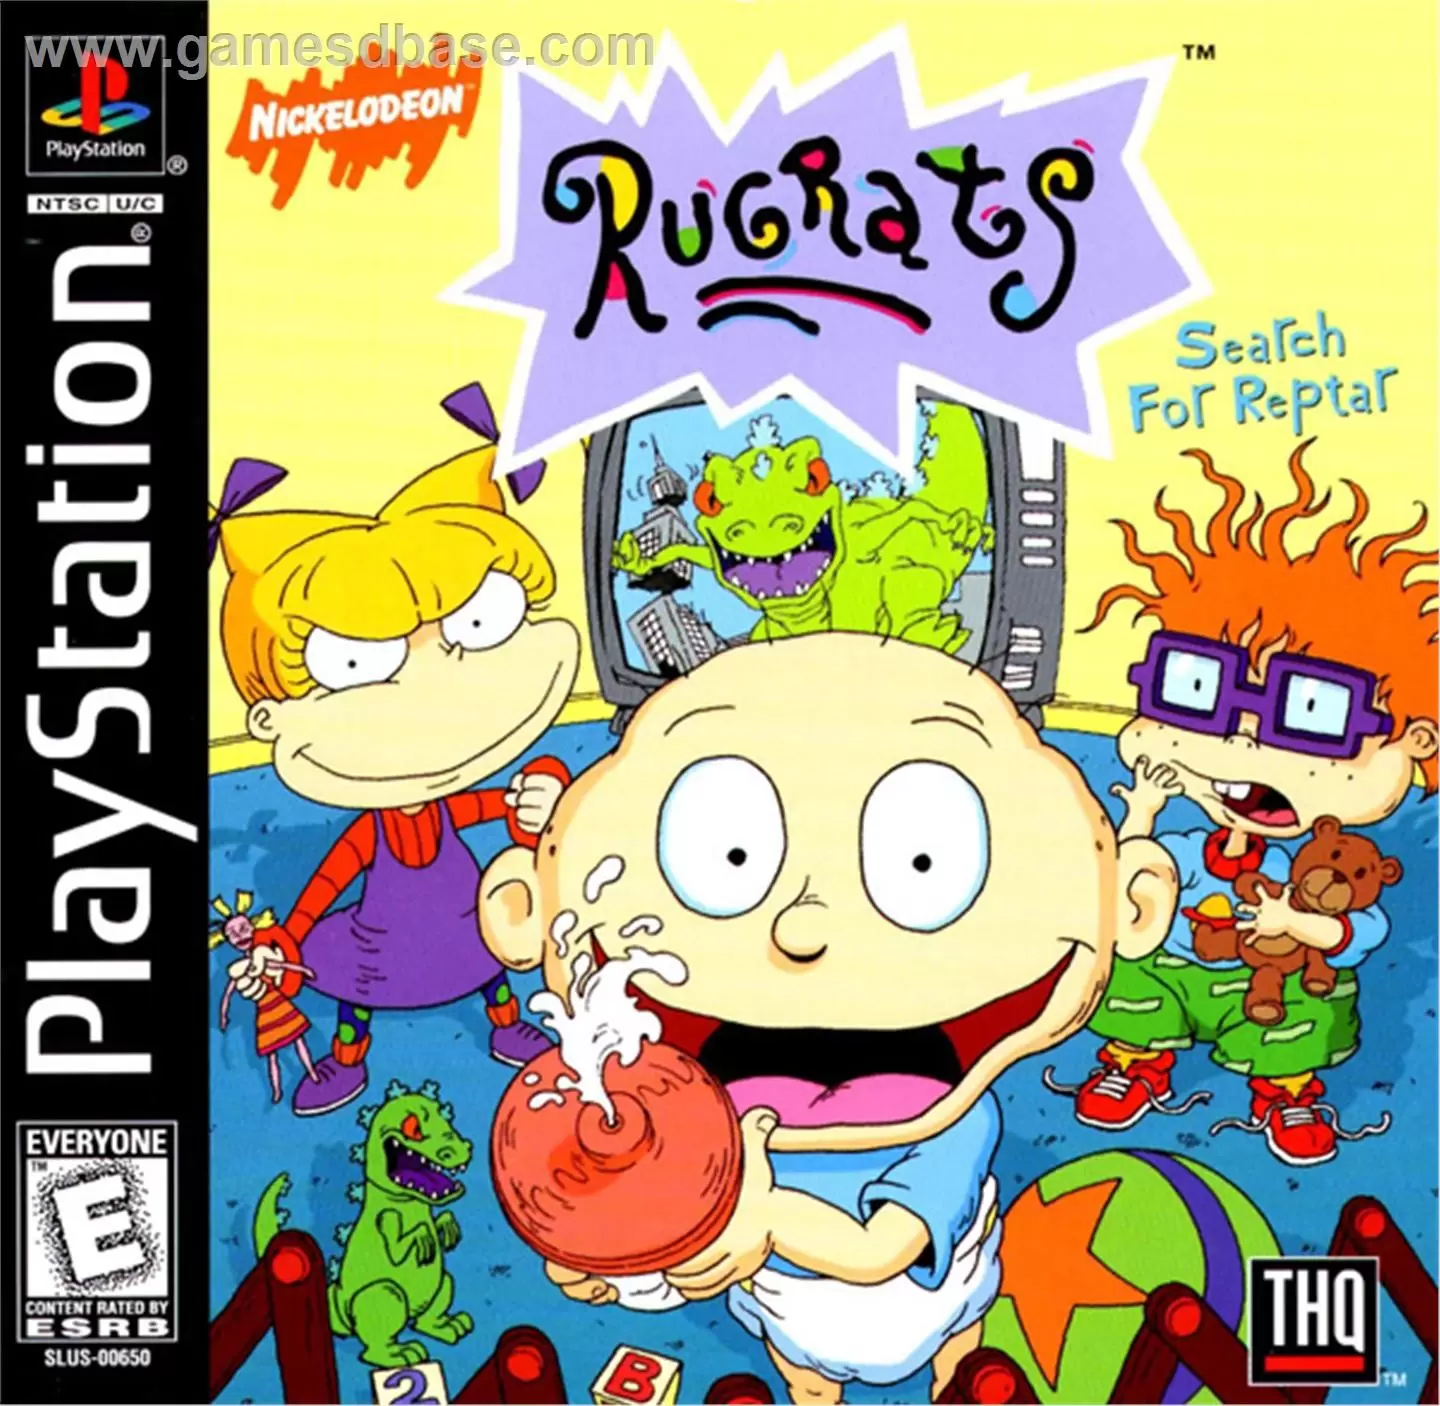 Jeux Playstation PS1 - Rugrats: The Search For Reptar